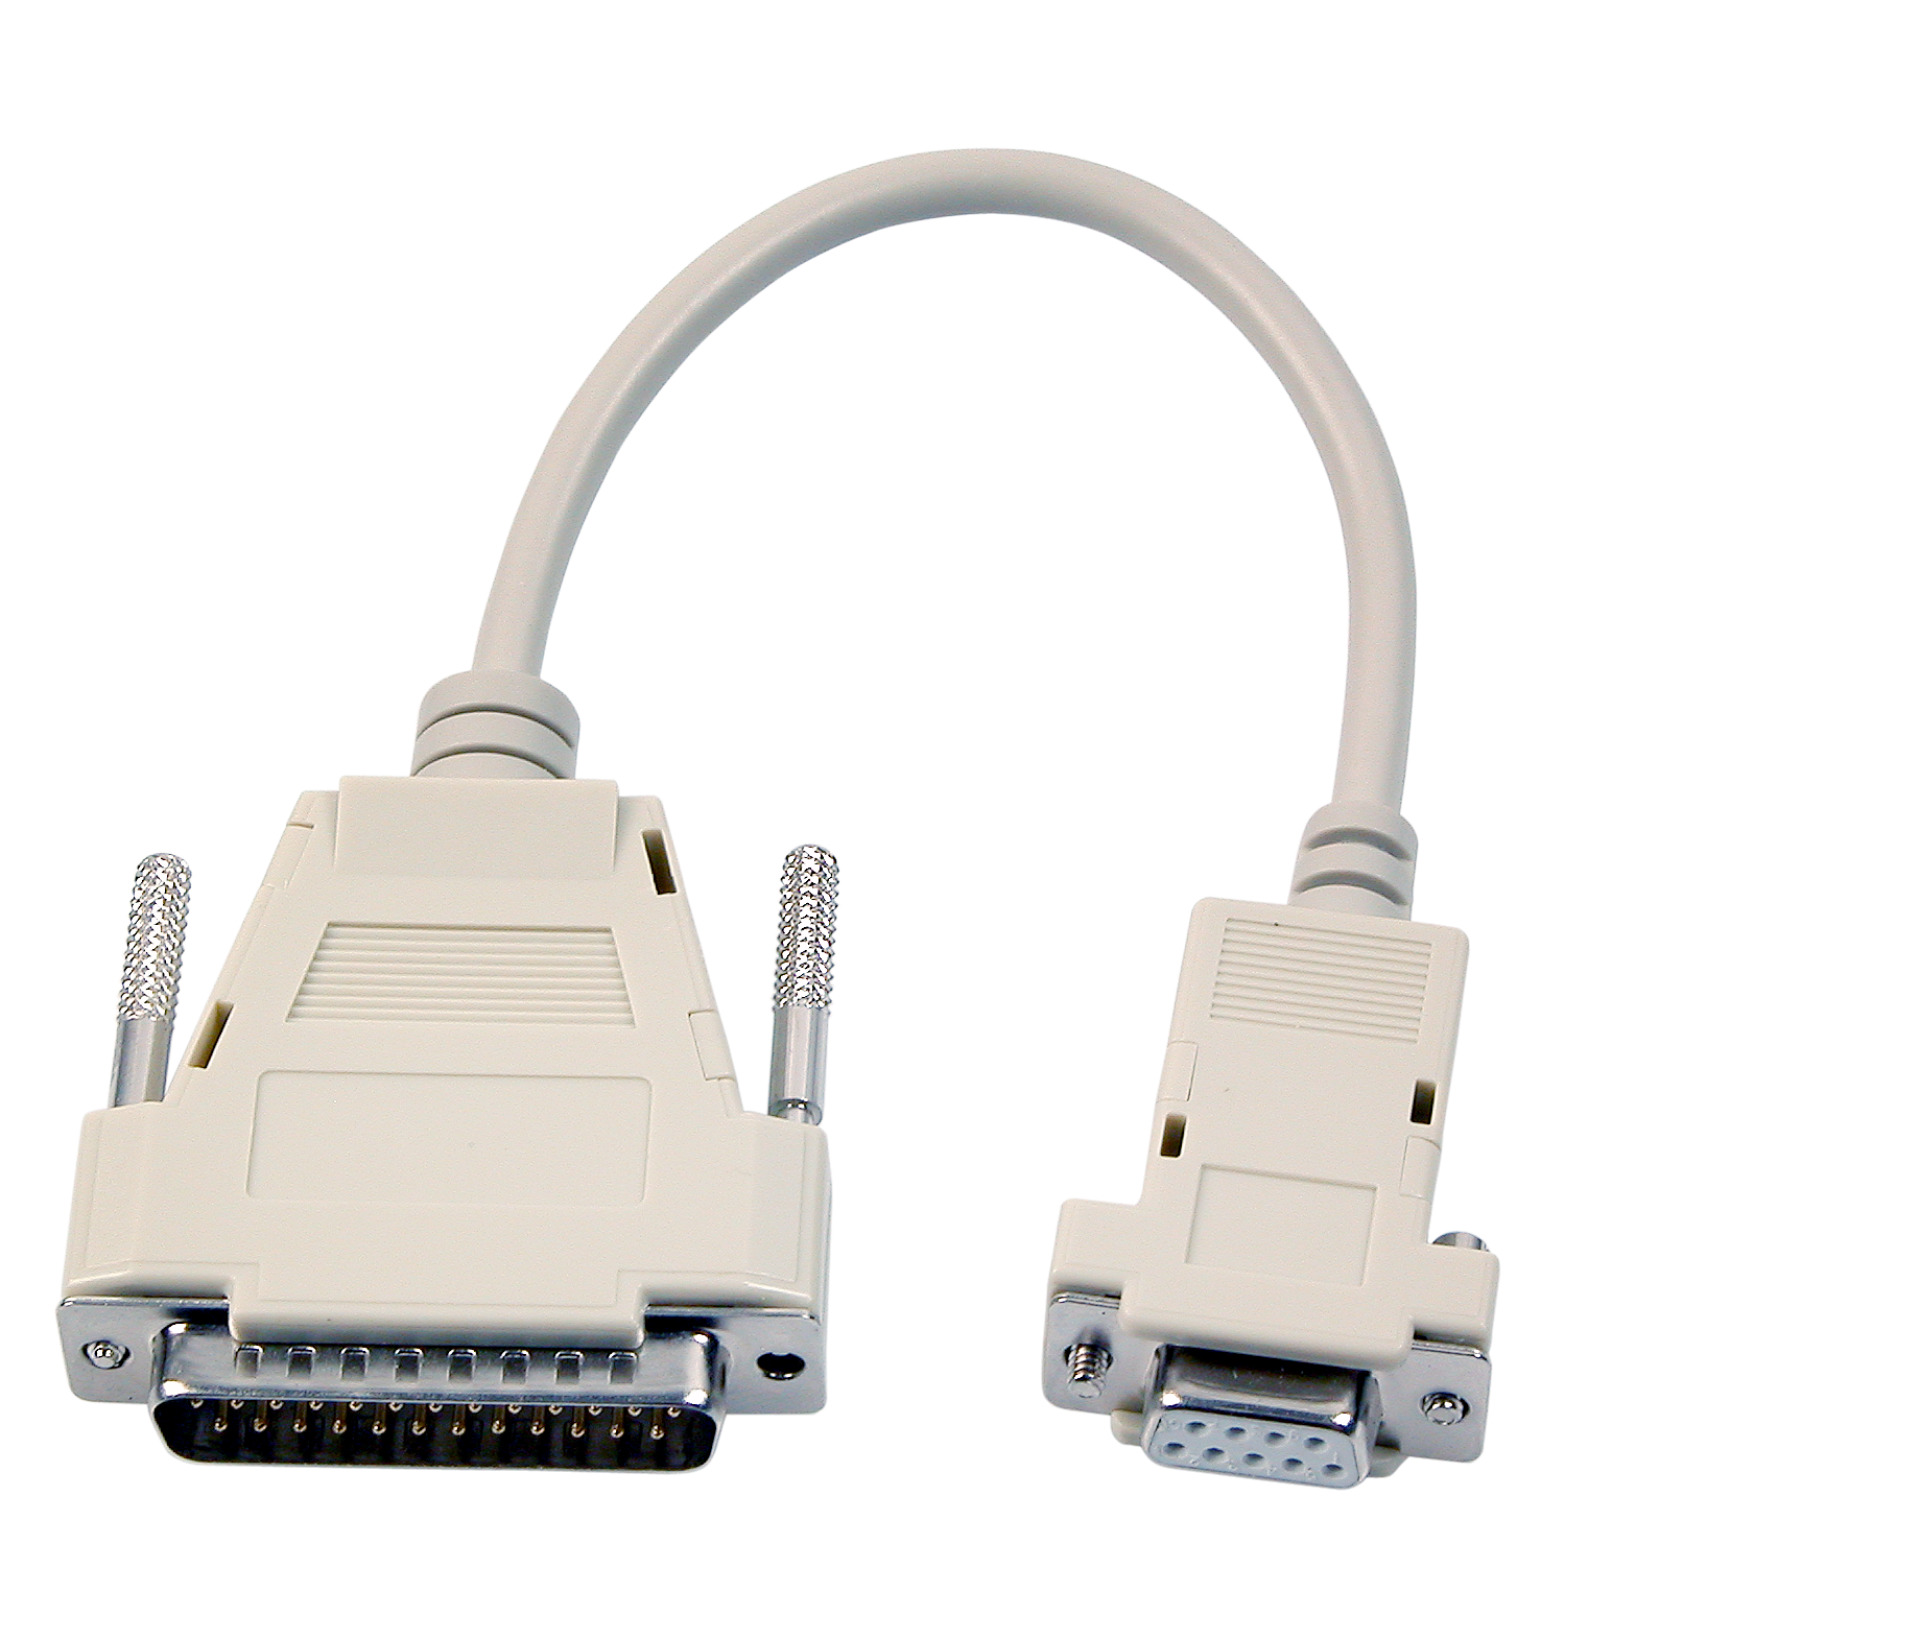 Mouse-Modem Adapter Cable, DSub 9 to DSub 25, F-M, 2,0m, beige  